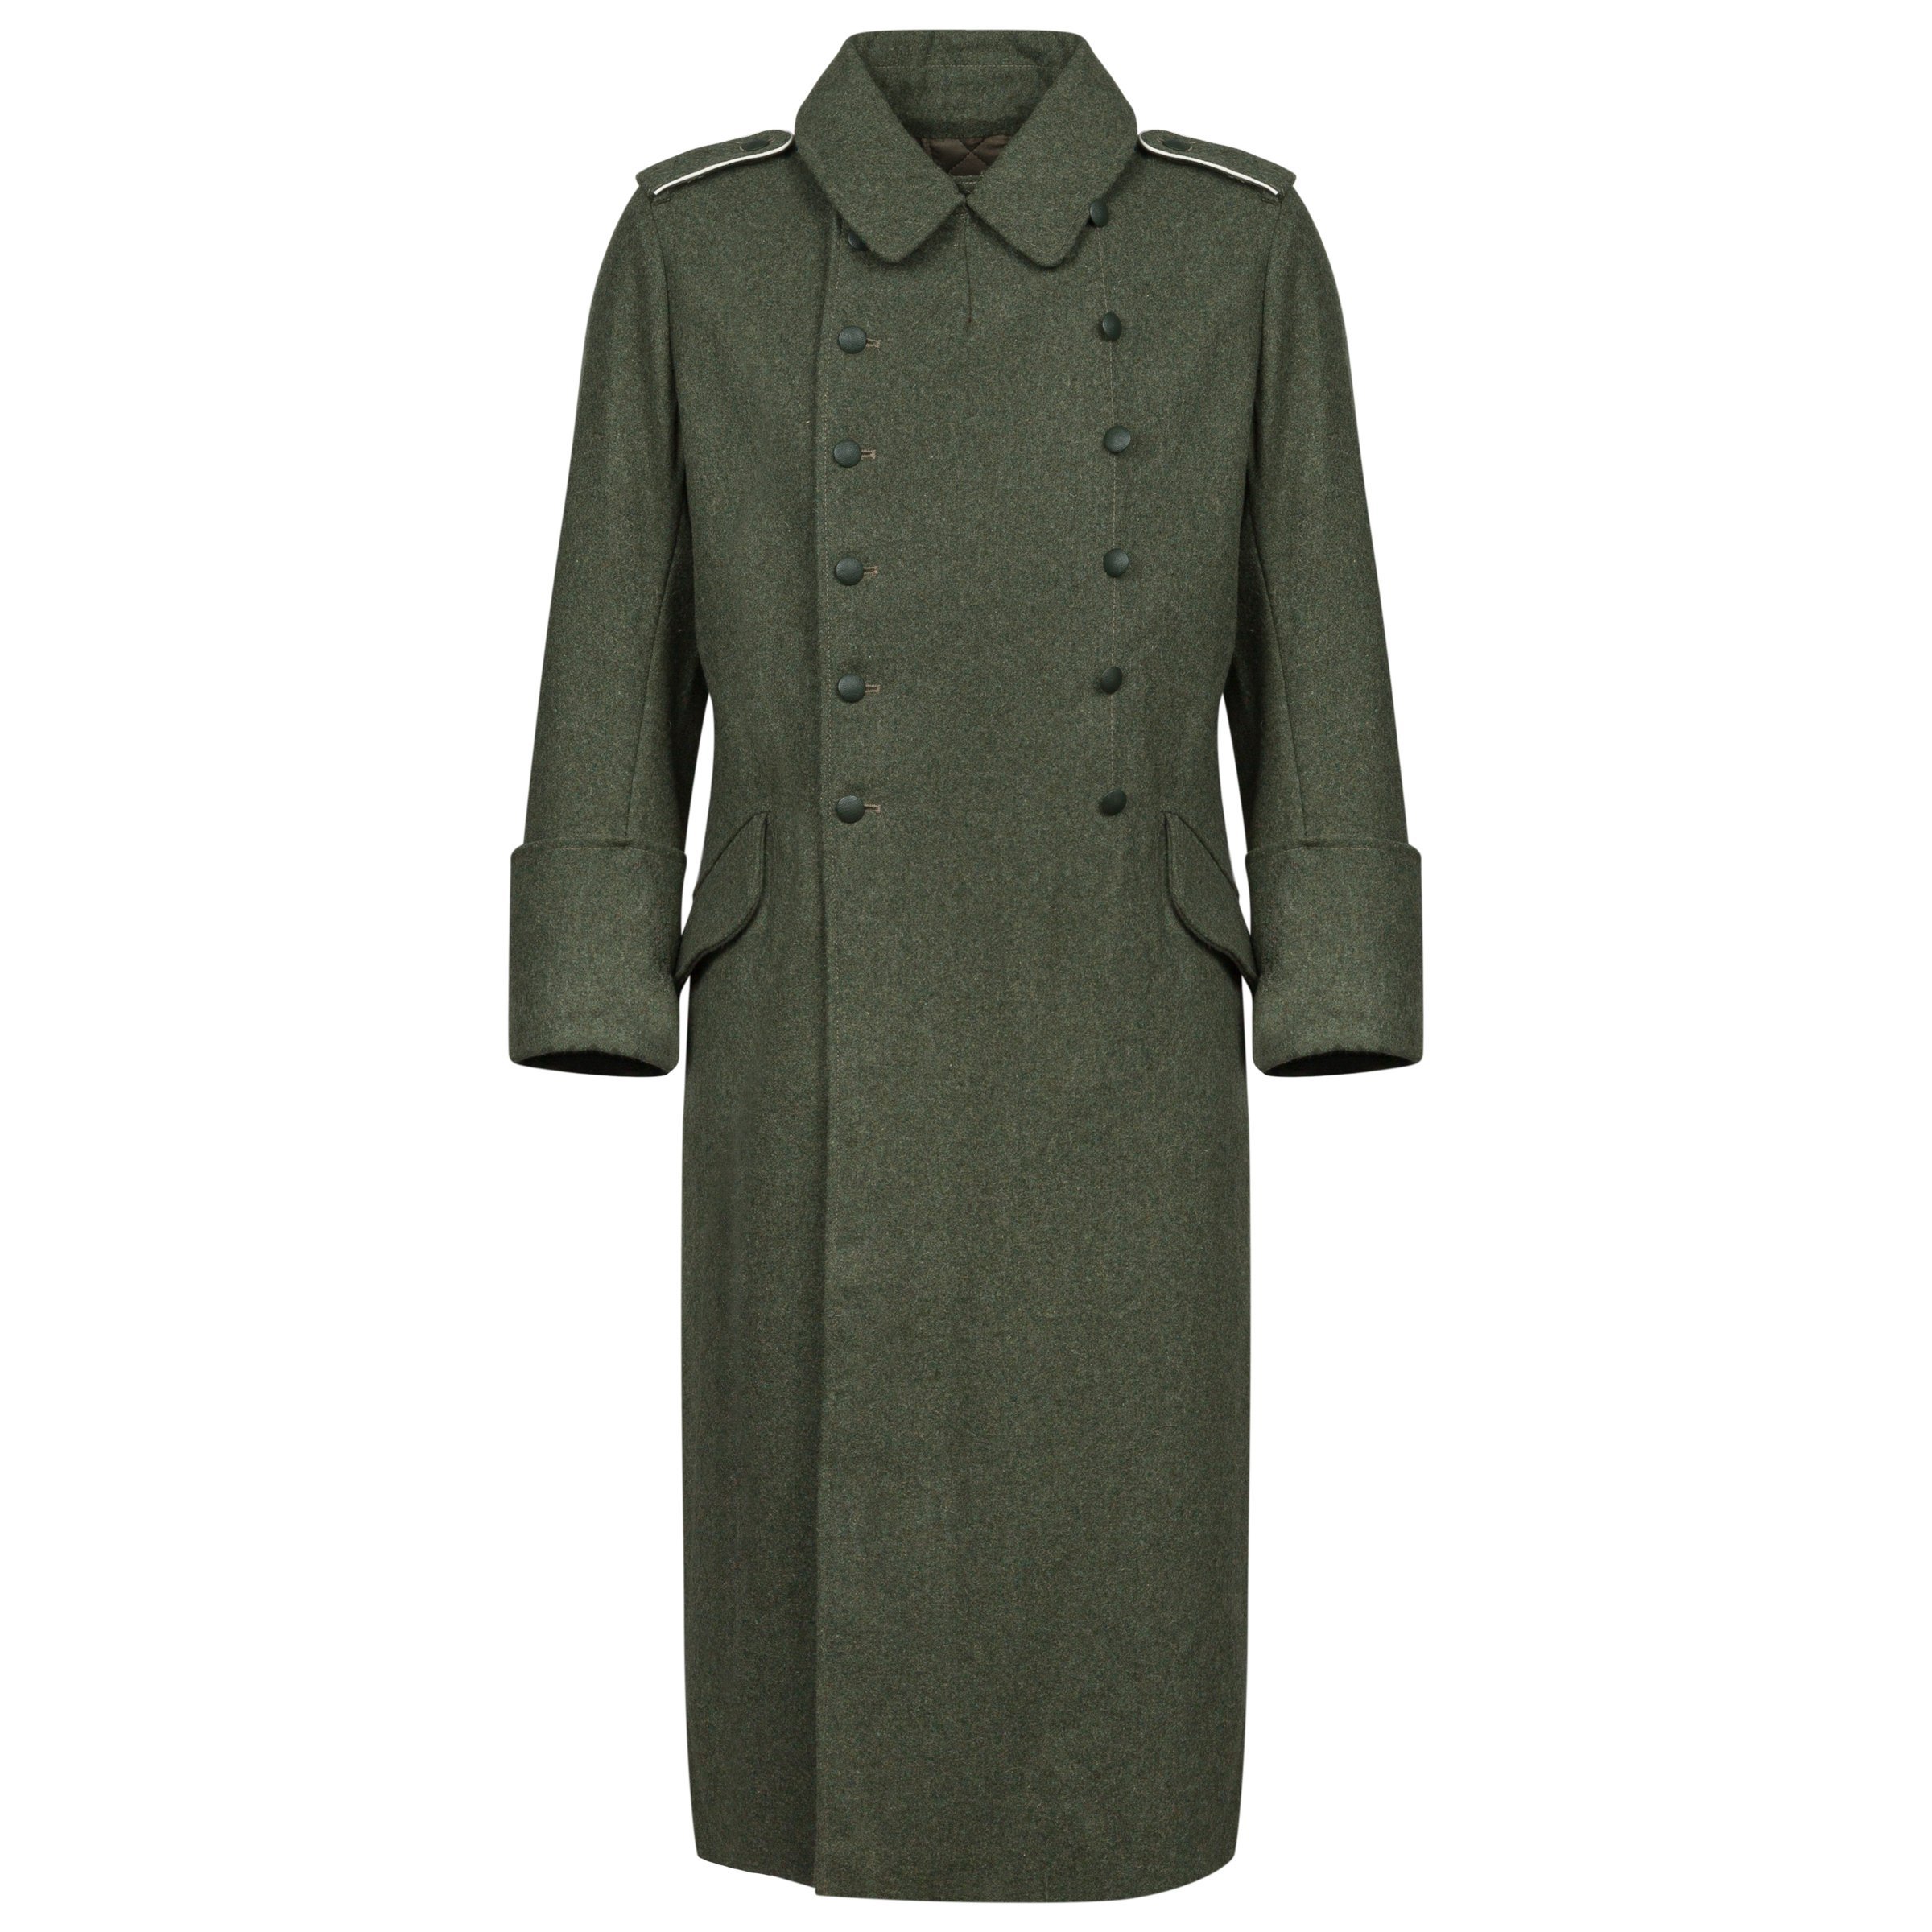 WH/SS M40 Greatcoat 48 184,75 € | Nestof.pl